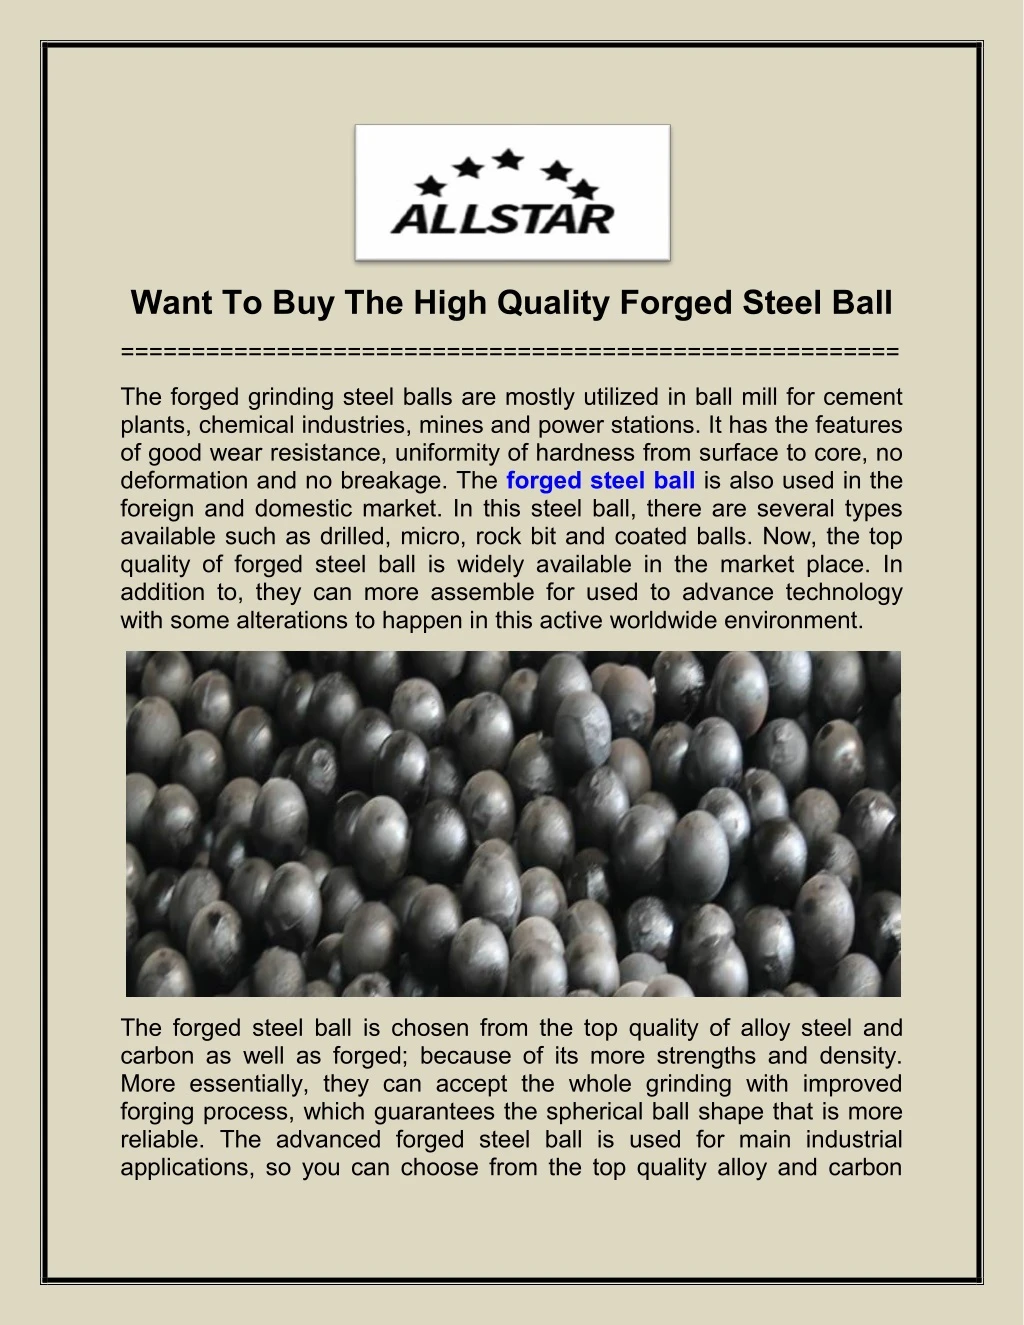 want to buy the high quality forged steel ball